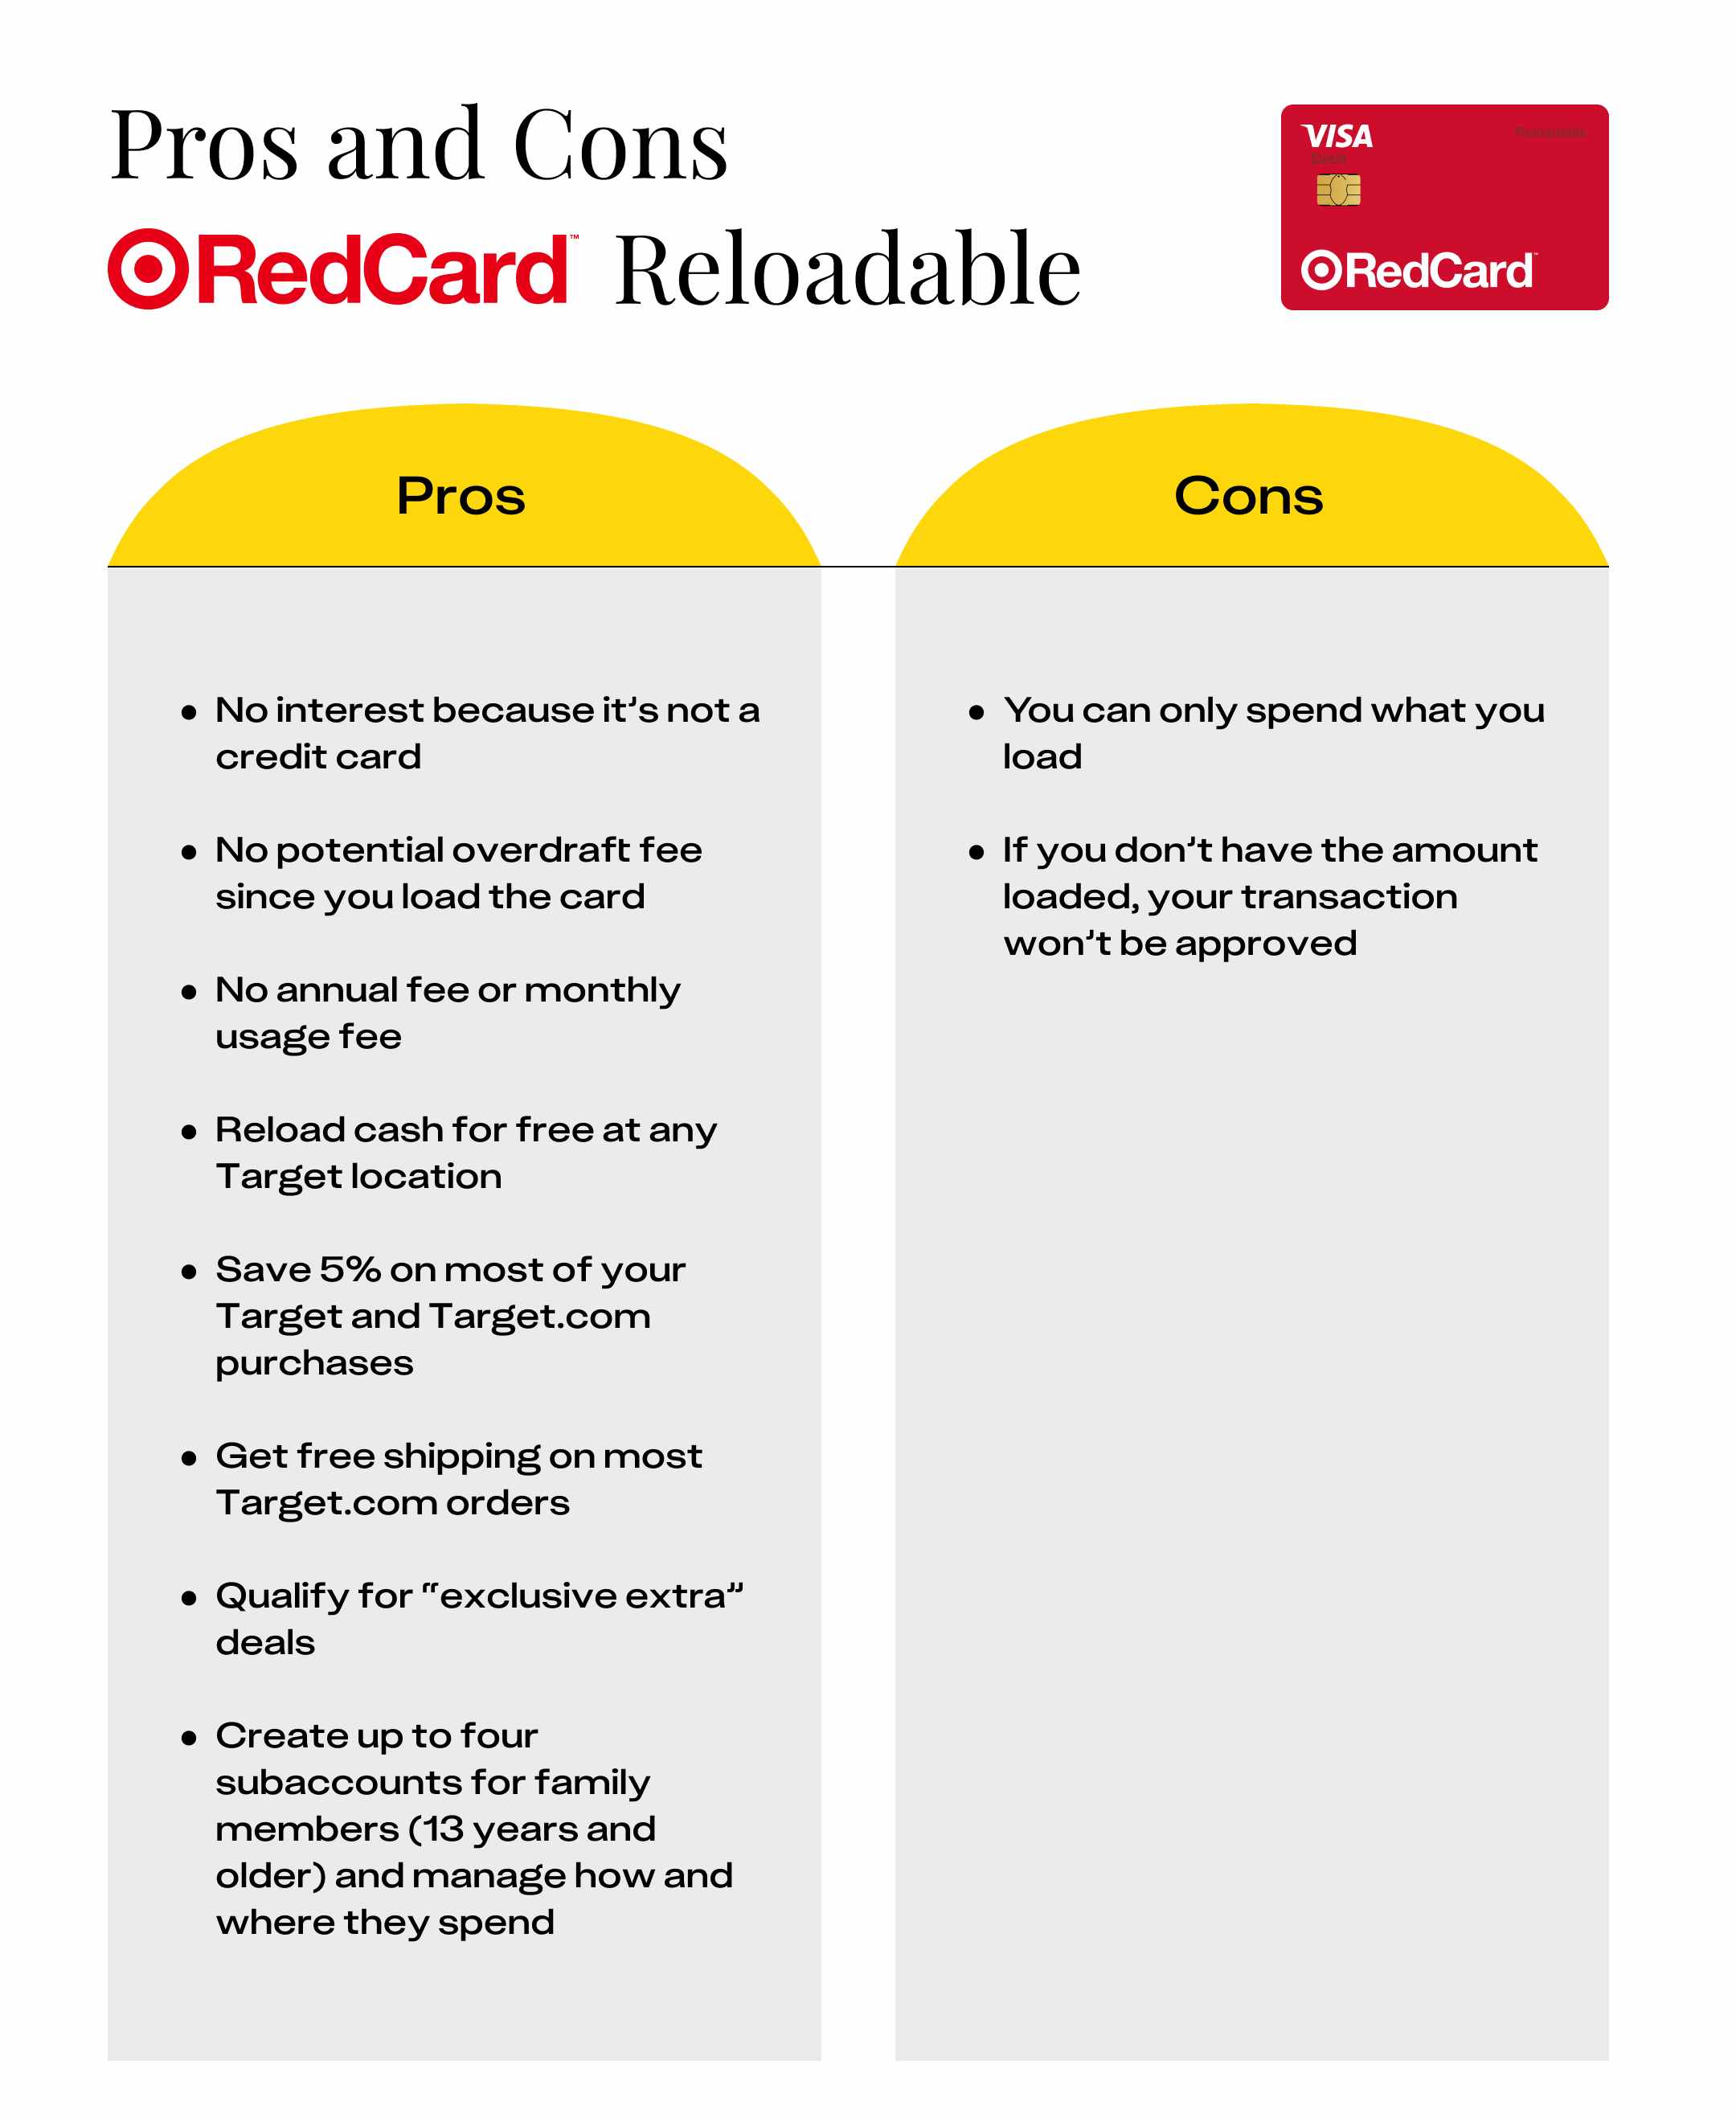 graphic showing the pros and cons of a redcard reloadable card